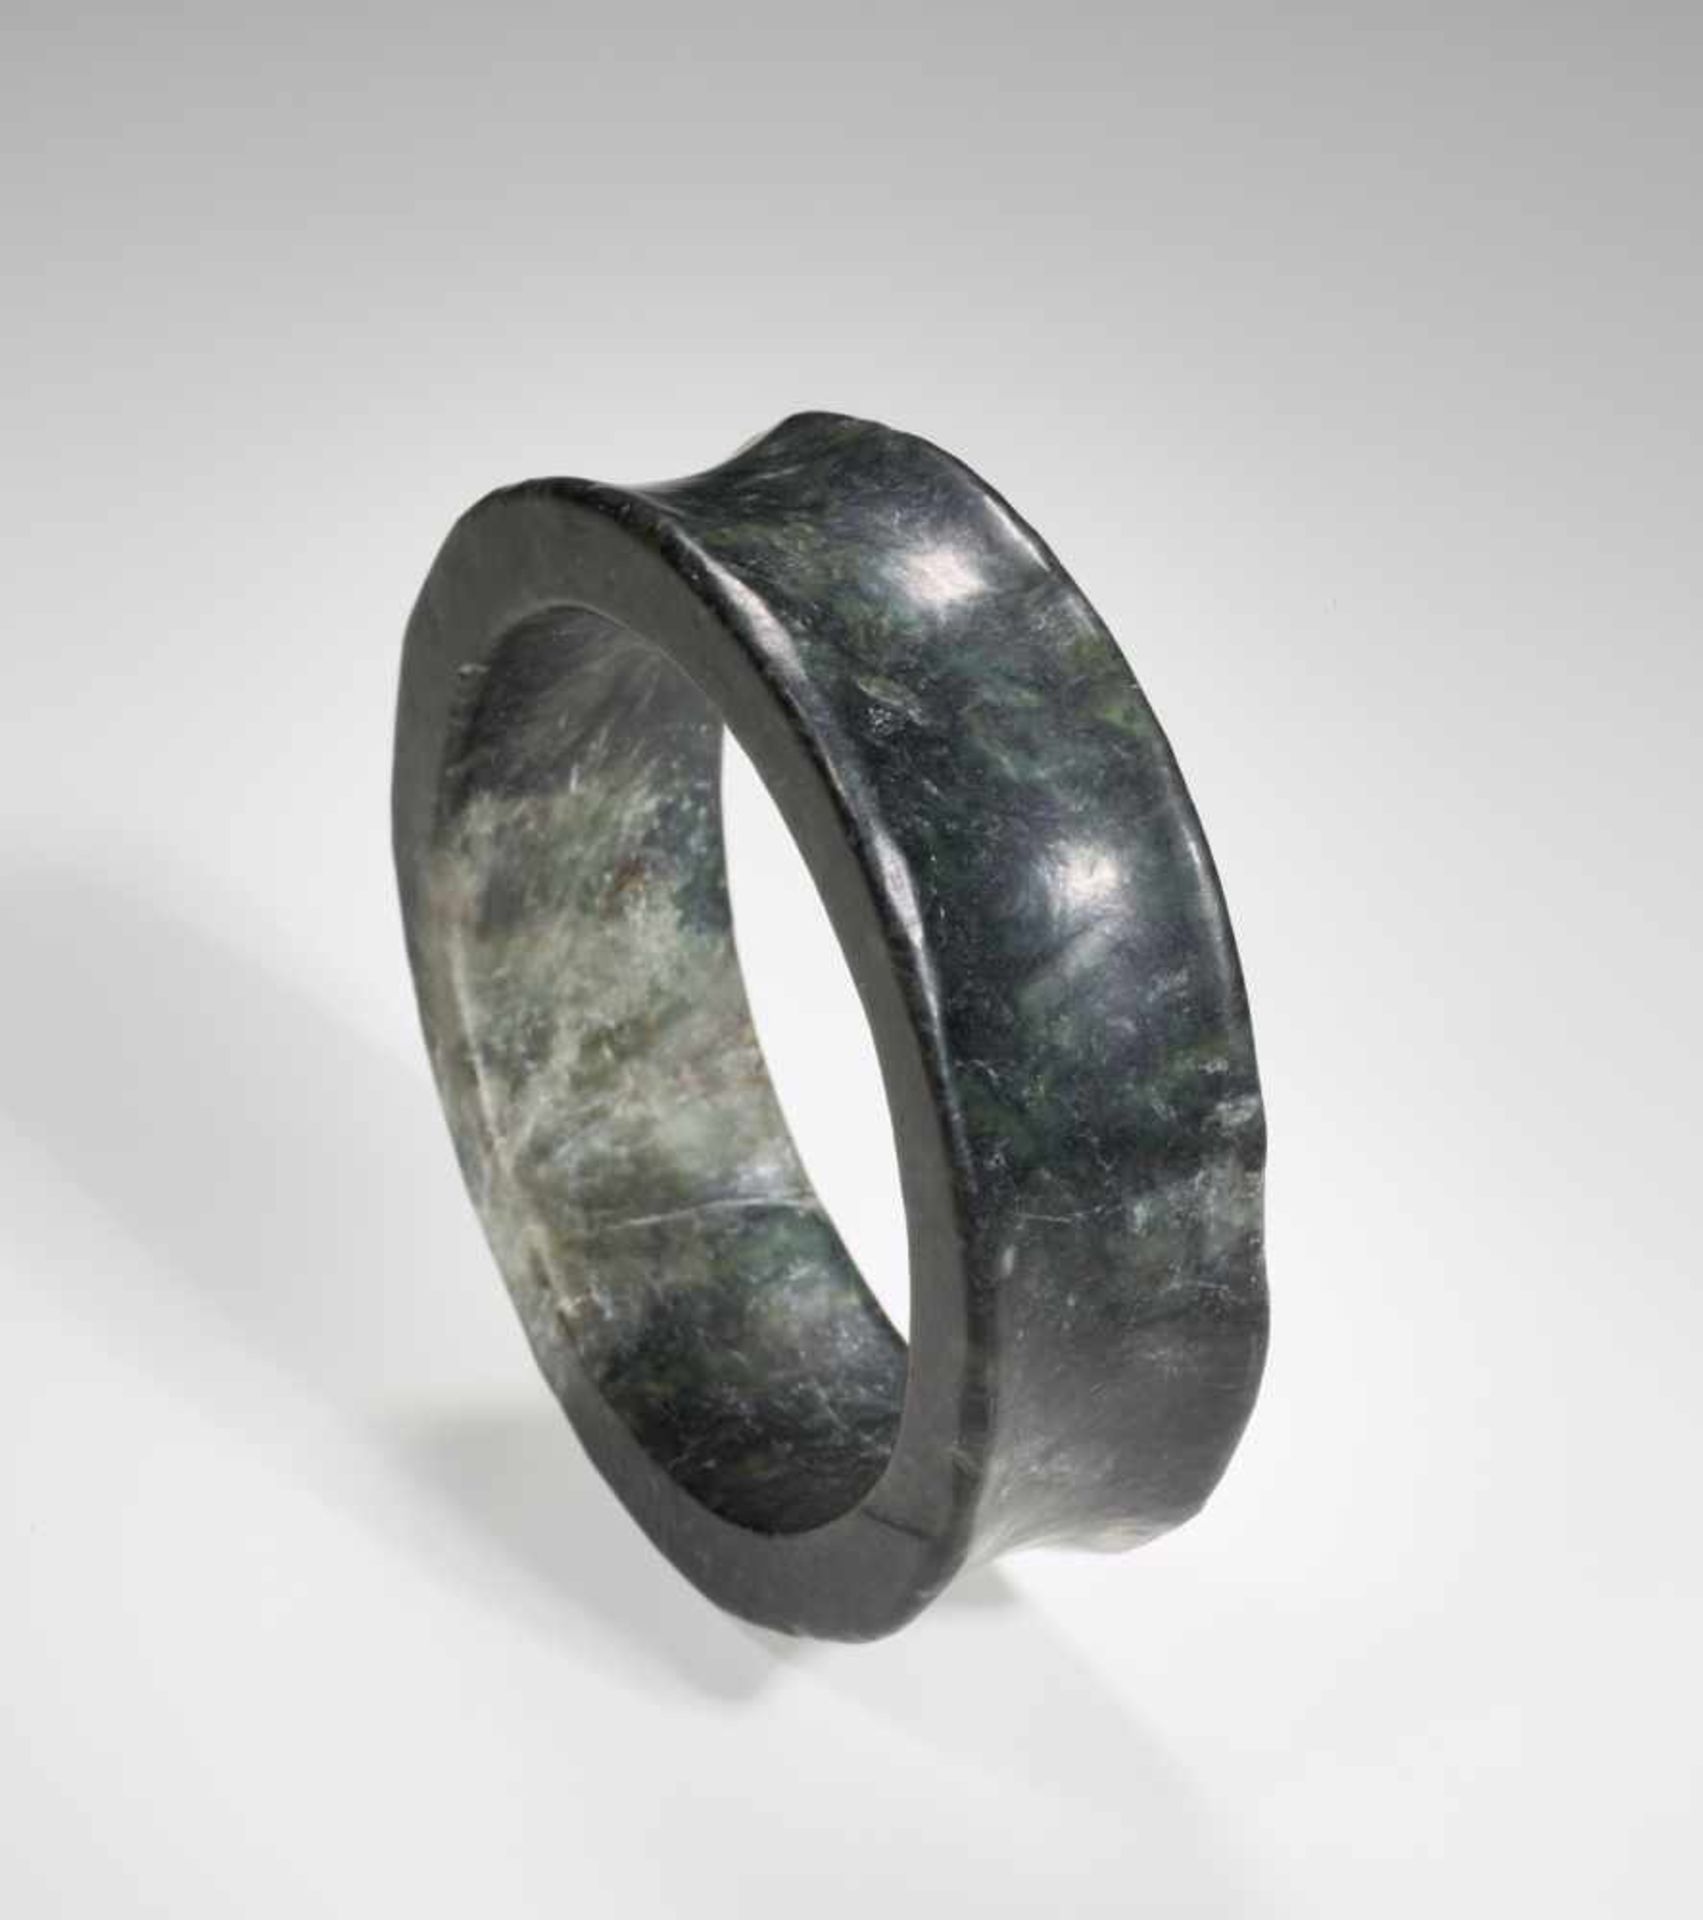 AN ELEGANT NEOLITHIC BRACELET IN DARK GREEN JADE WITH A SMOOTH CONCAVE BORDER Jade. China, Late